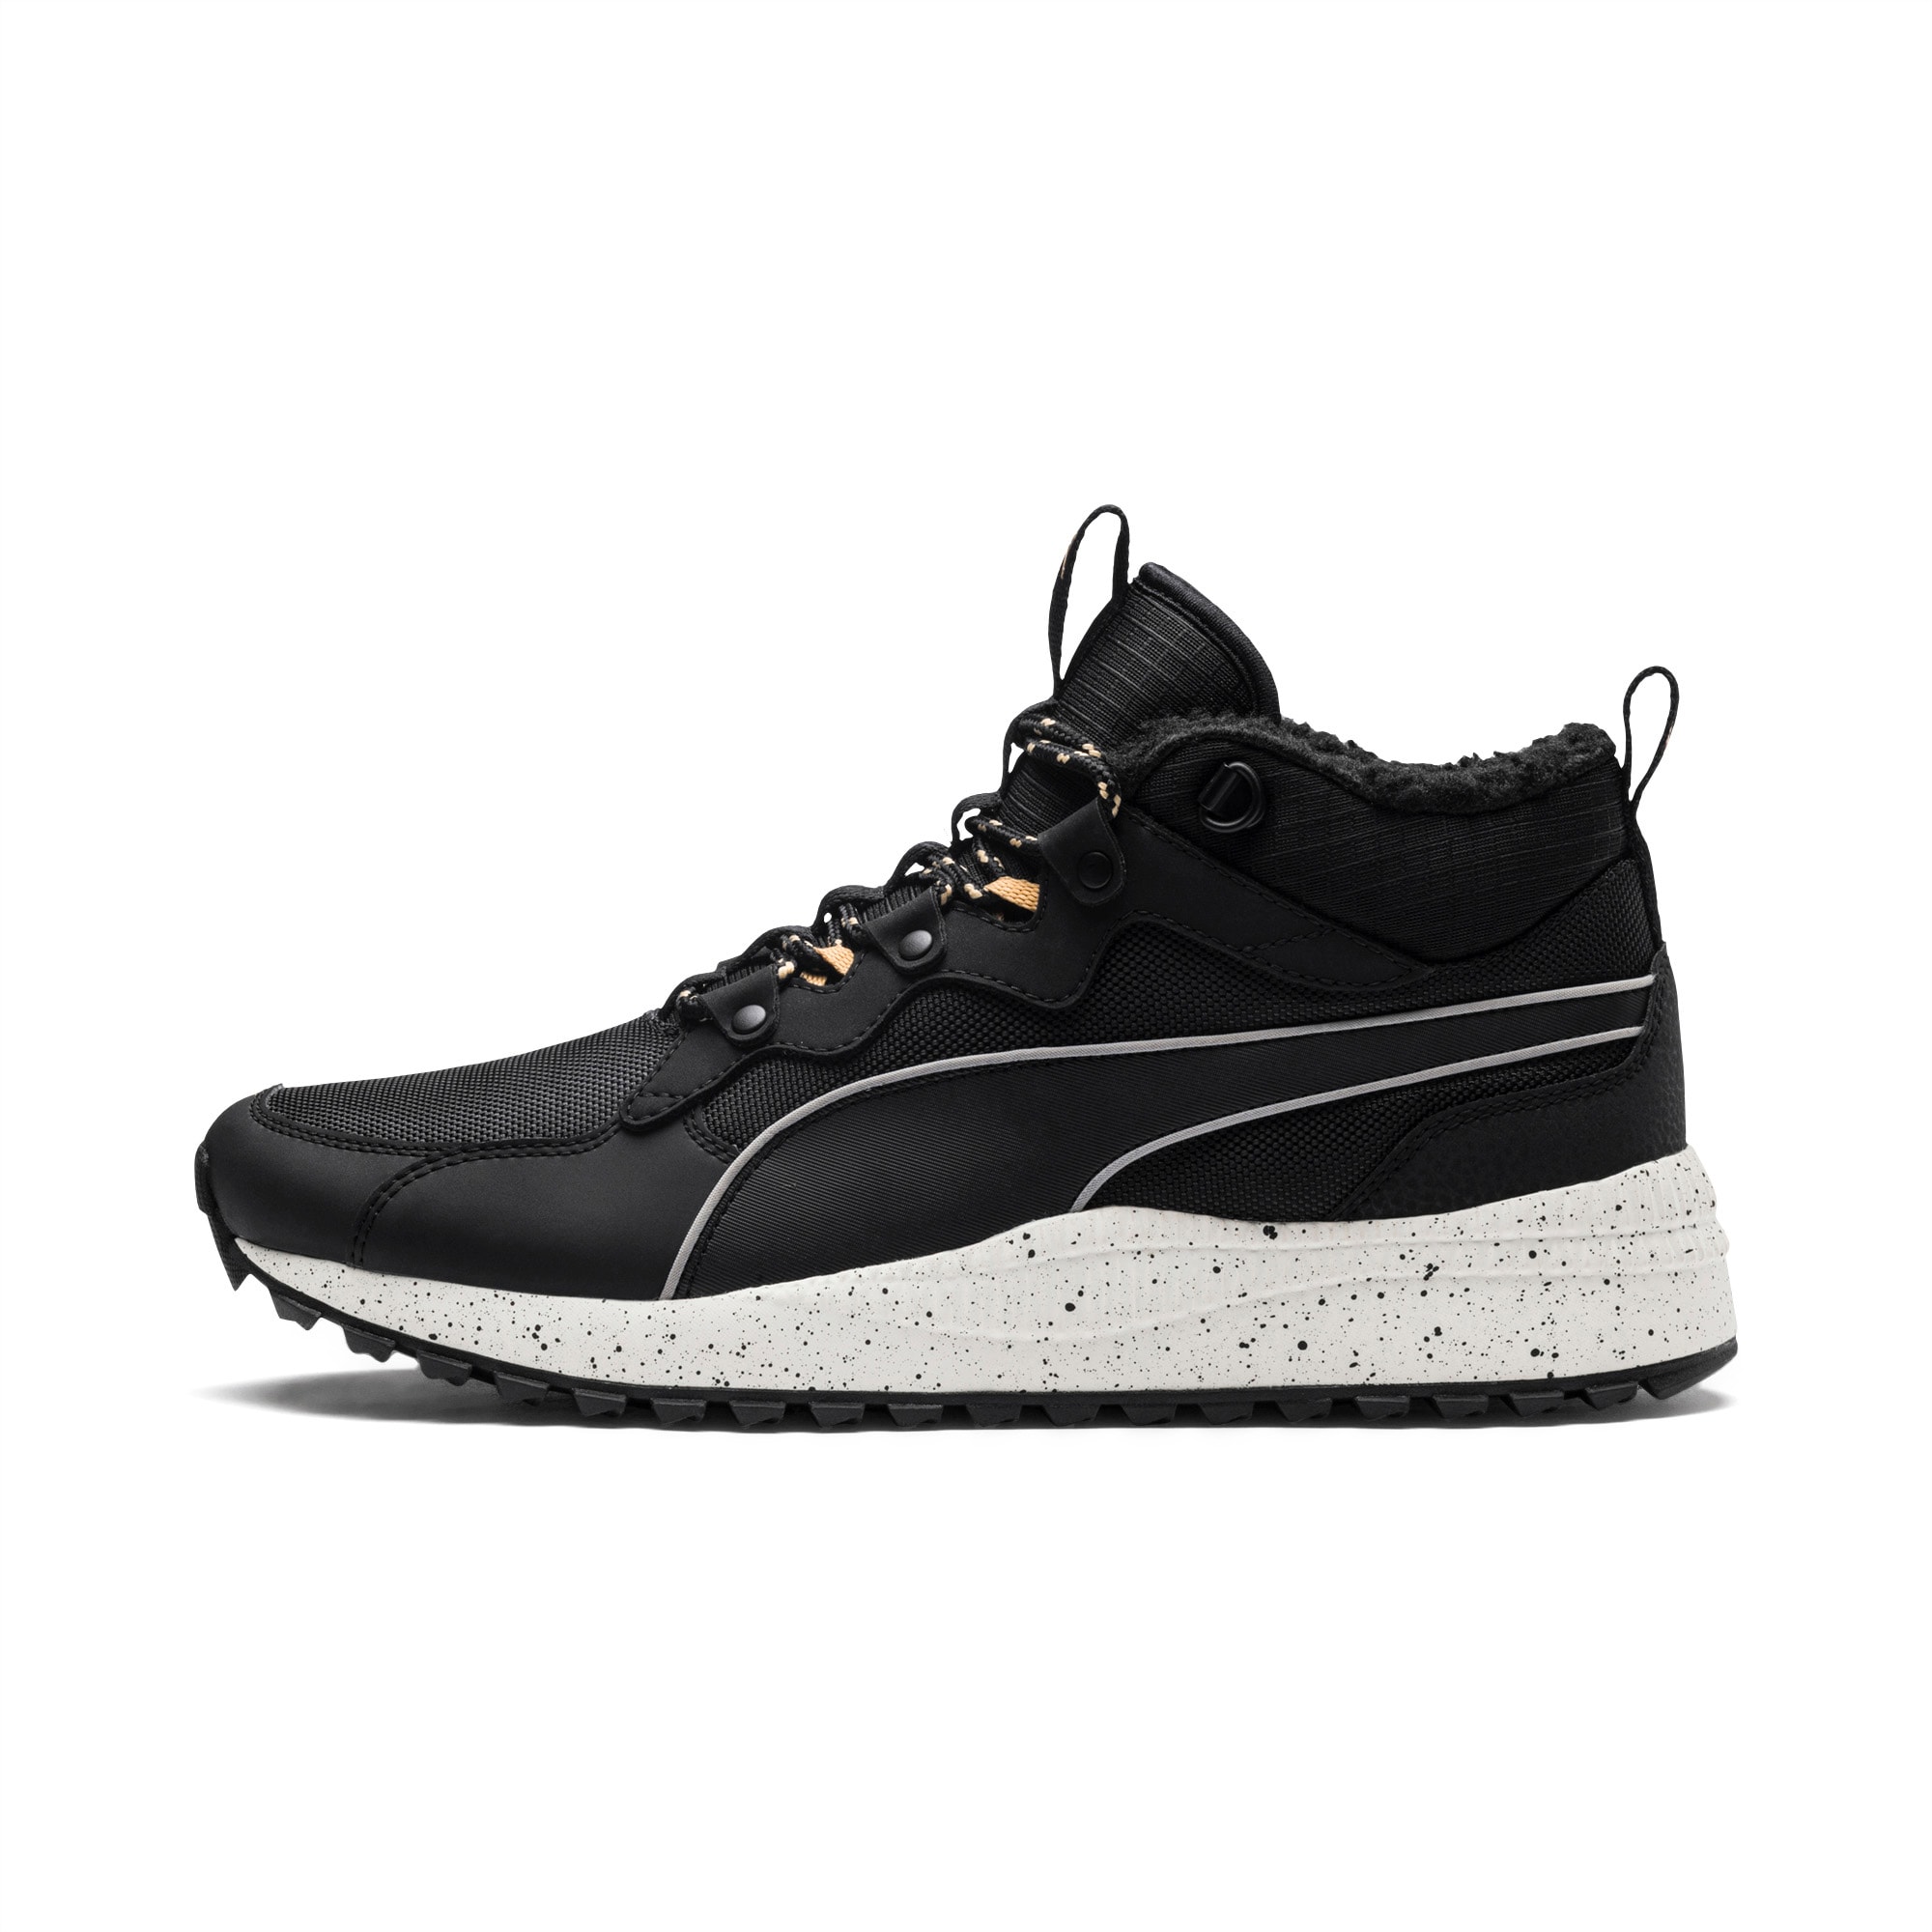 Pacer Next Trainers Winterised Boots 